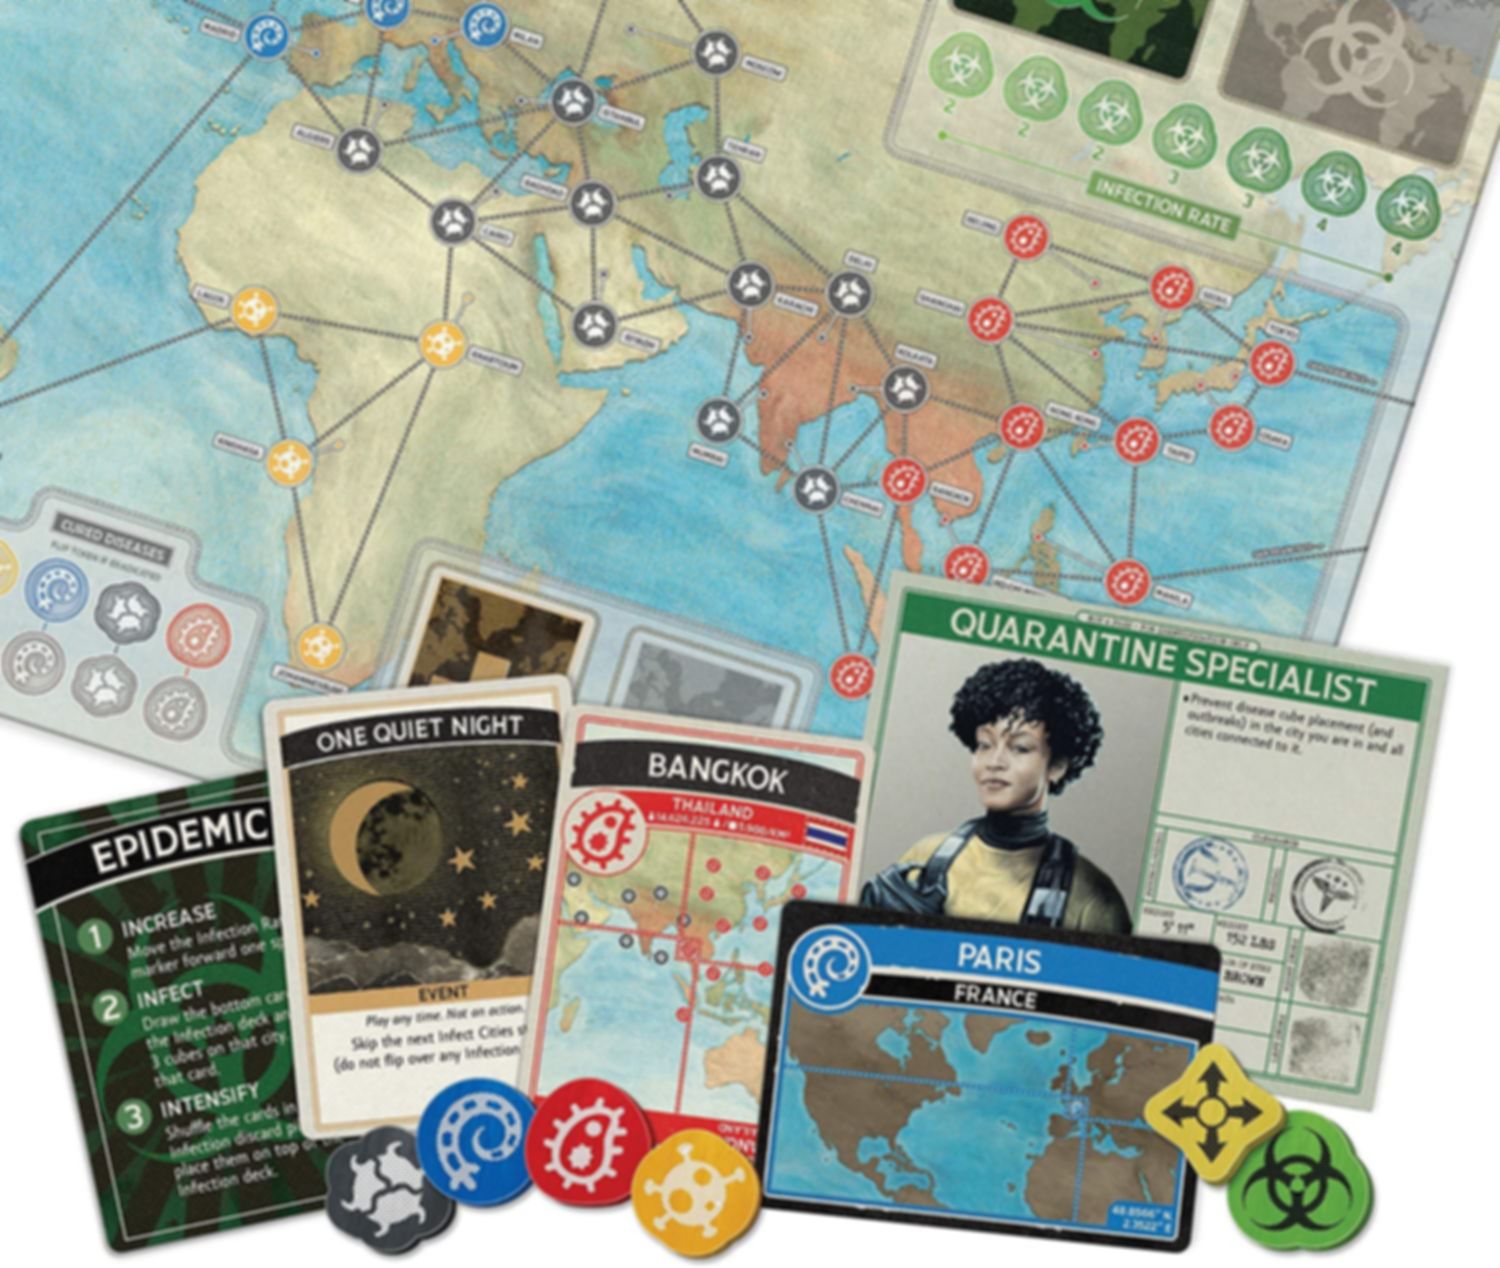 Pandemic 10th Anniversary components